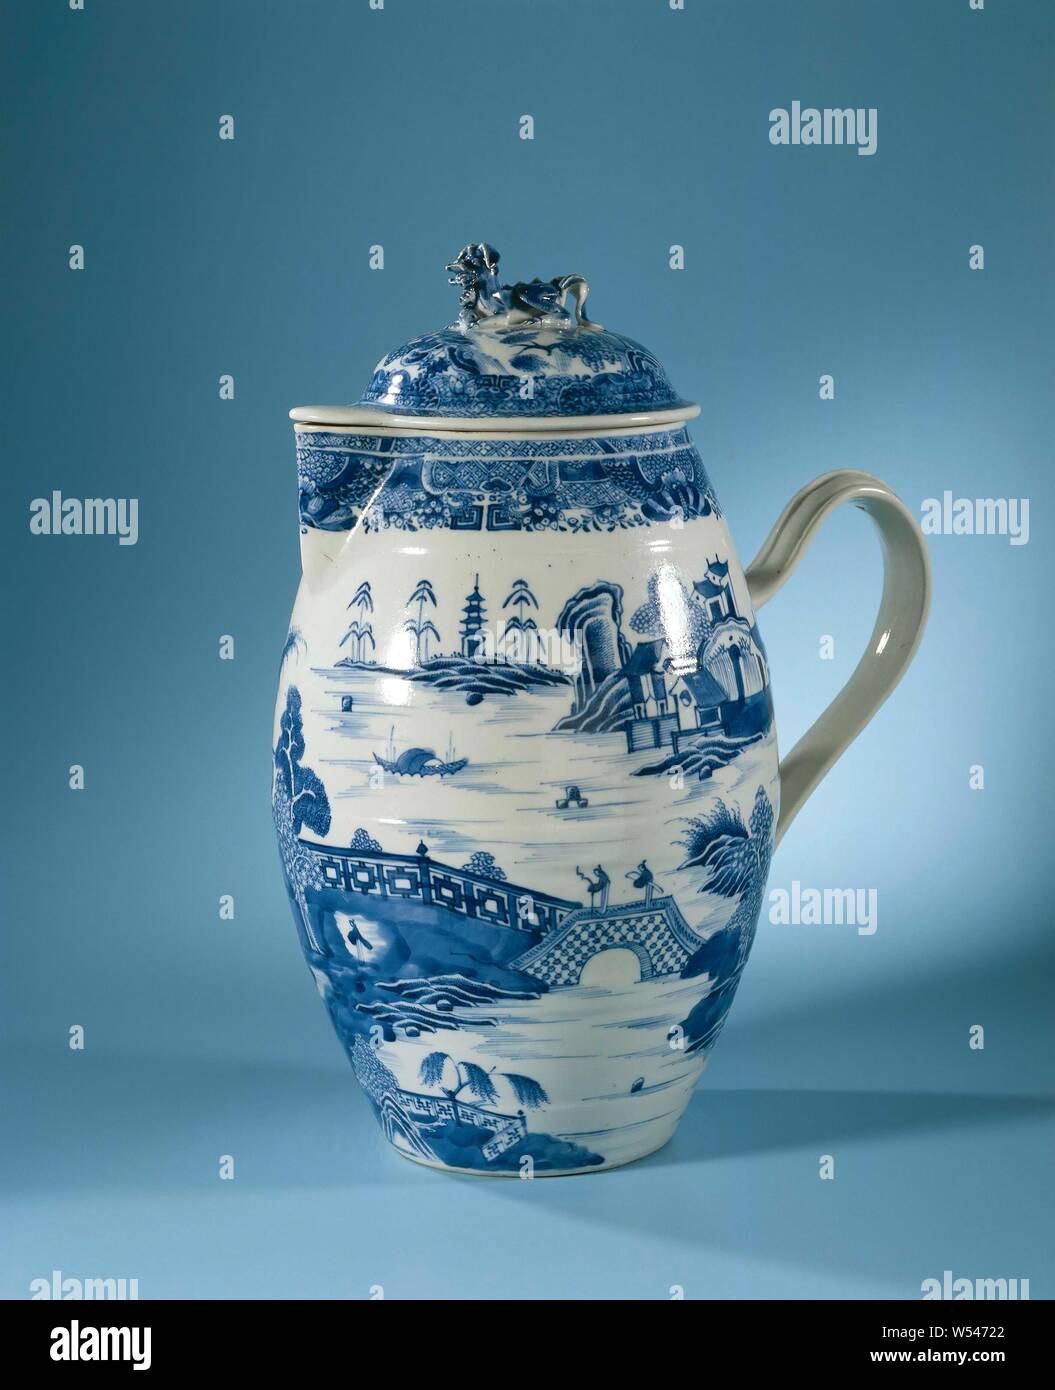 Pitcher with a riverlandscape with large pavilion and figures, Jug with porcelain lid with a barrel-shaped belly, triangular spout and rim, painted in underglaze blue. On the wall of the jug a continuous river landscape with pavilions, mountains, trees, people and a boat, the edge with FitzHugh strap, a branch on the ear. The lid with a river landscape with two people on a bridge, mountains and pavilions, the bud in the shape of a lion. Blue White., anonymous, China, c. 1800 - c. 1824, Qing-dynasty (1644-1912) / Jiaqing-period (1796-1820) / Daoguang-period (1821-1850), porcelain (material Stock Photo